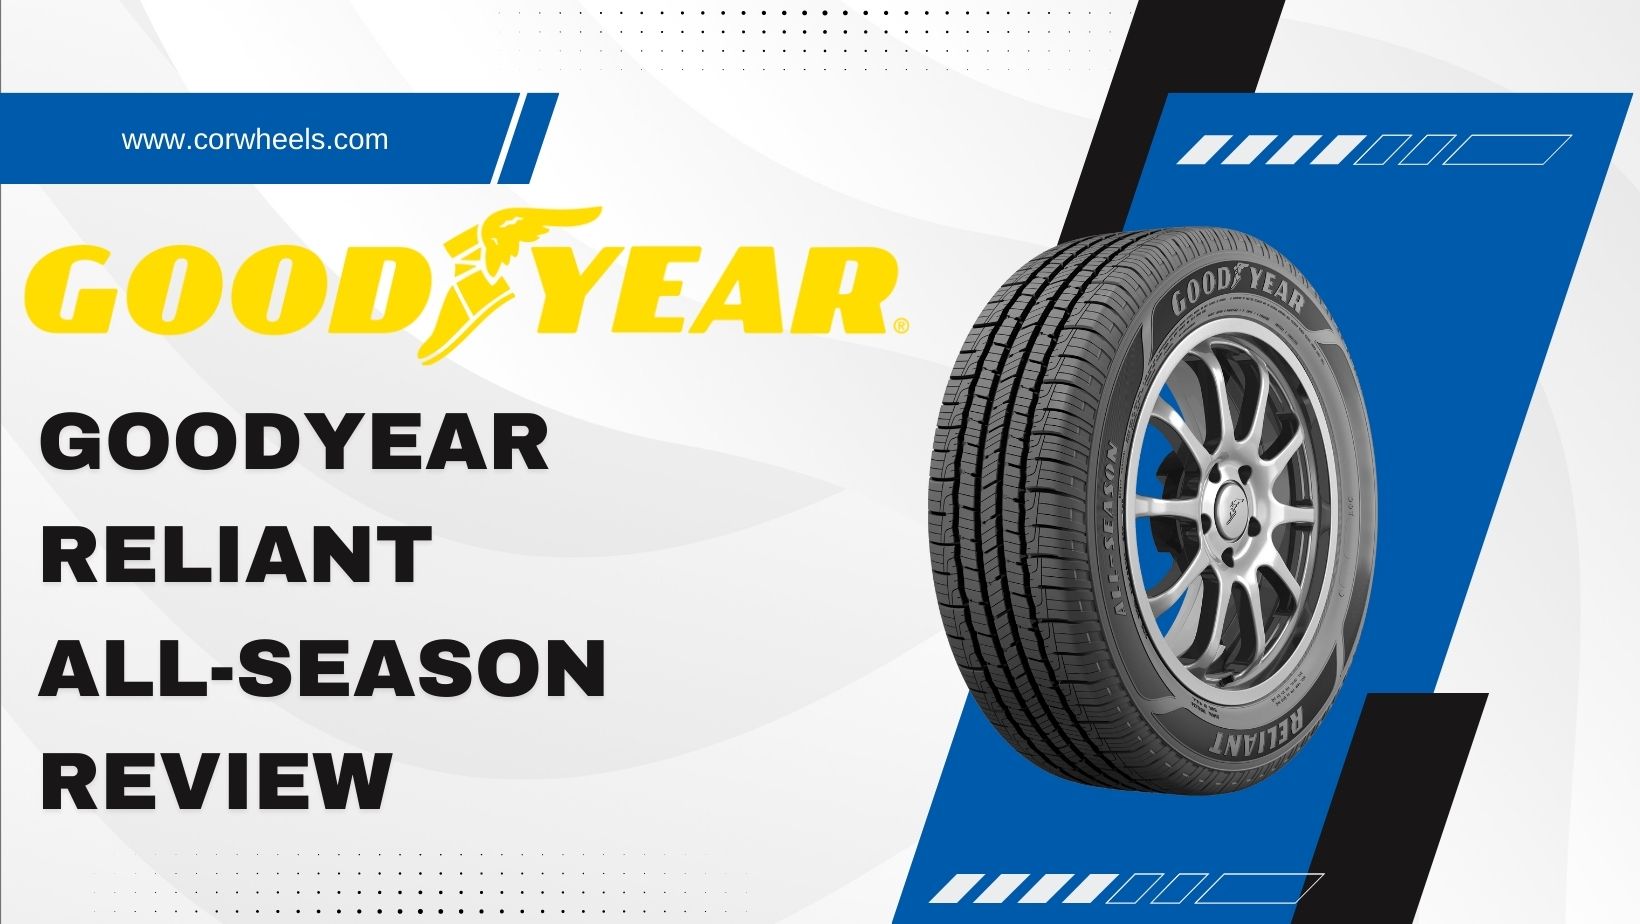 Goodyear Reliant All-Season review